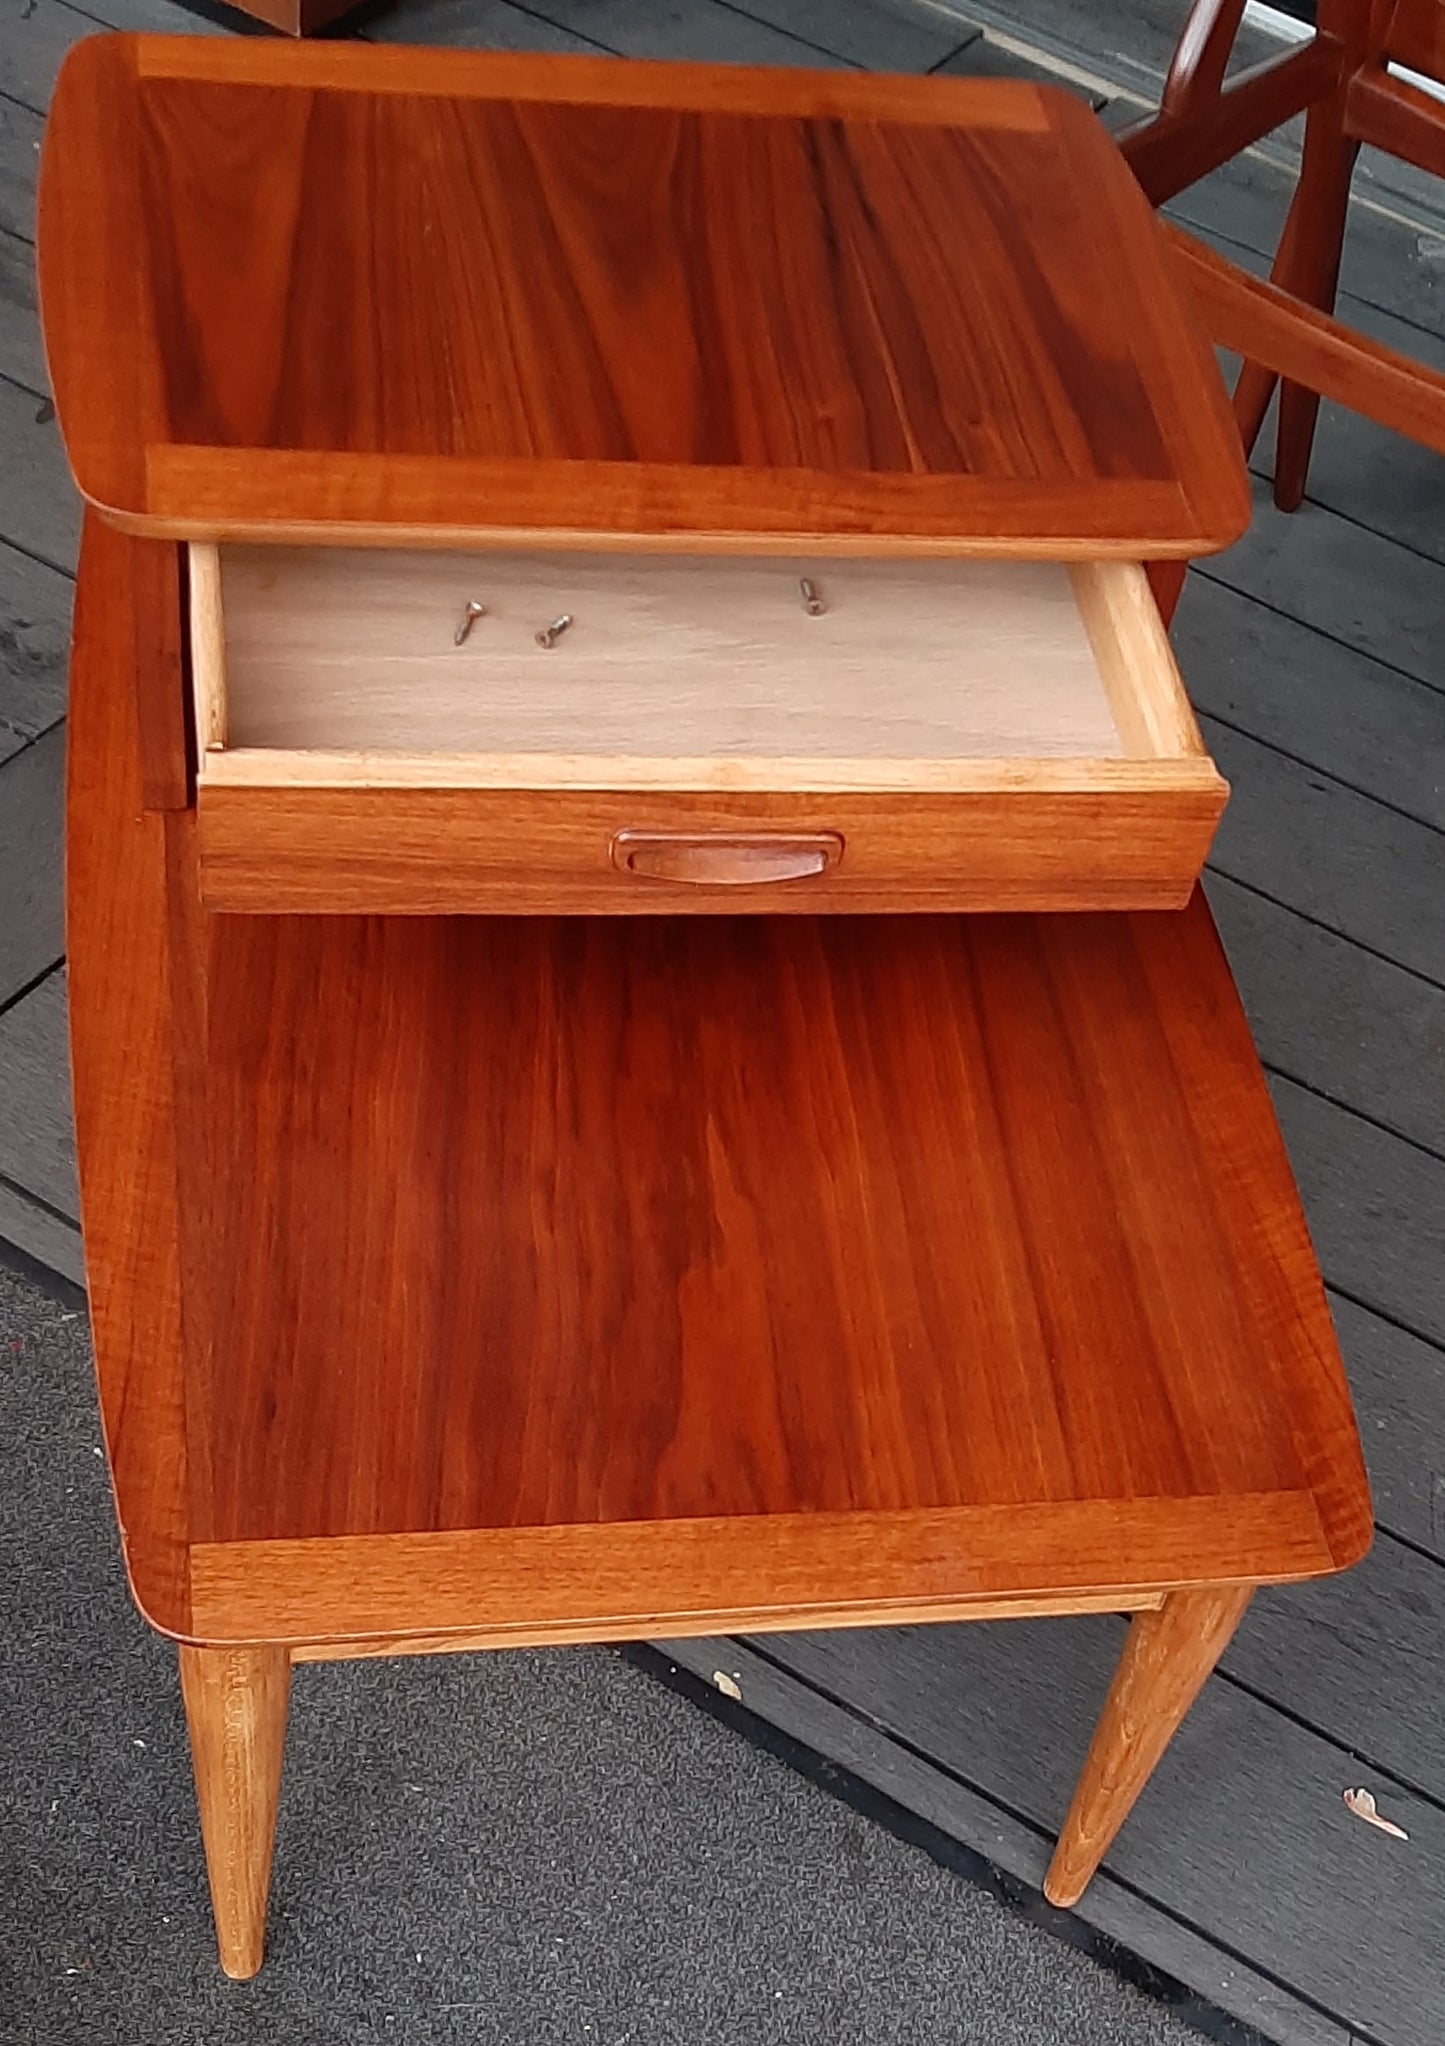 REFINISHED MCM Walnut Two Tier End Table with Drawer by Lane Altavista, PERFECT